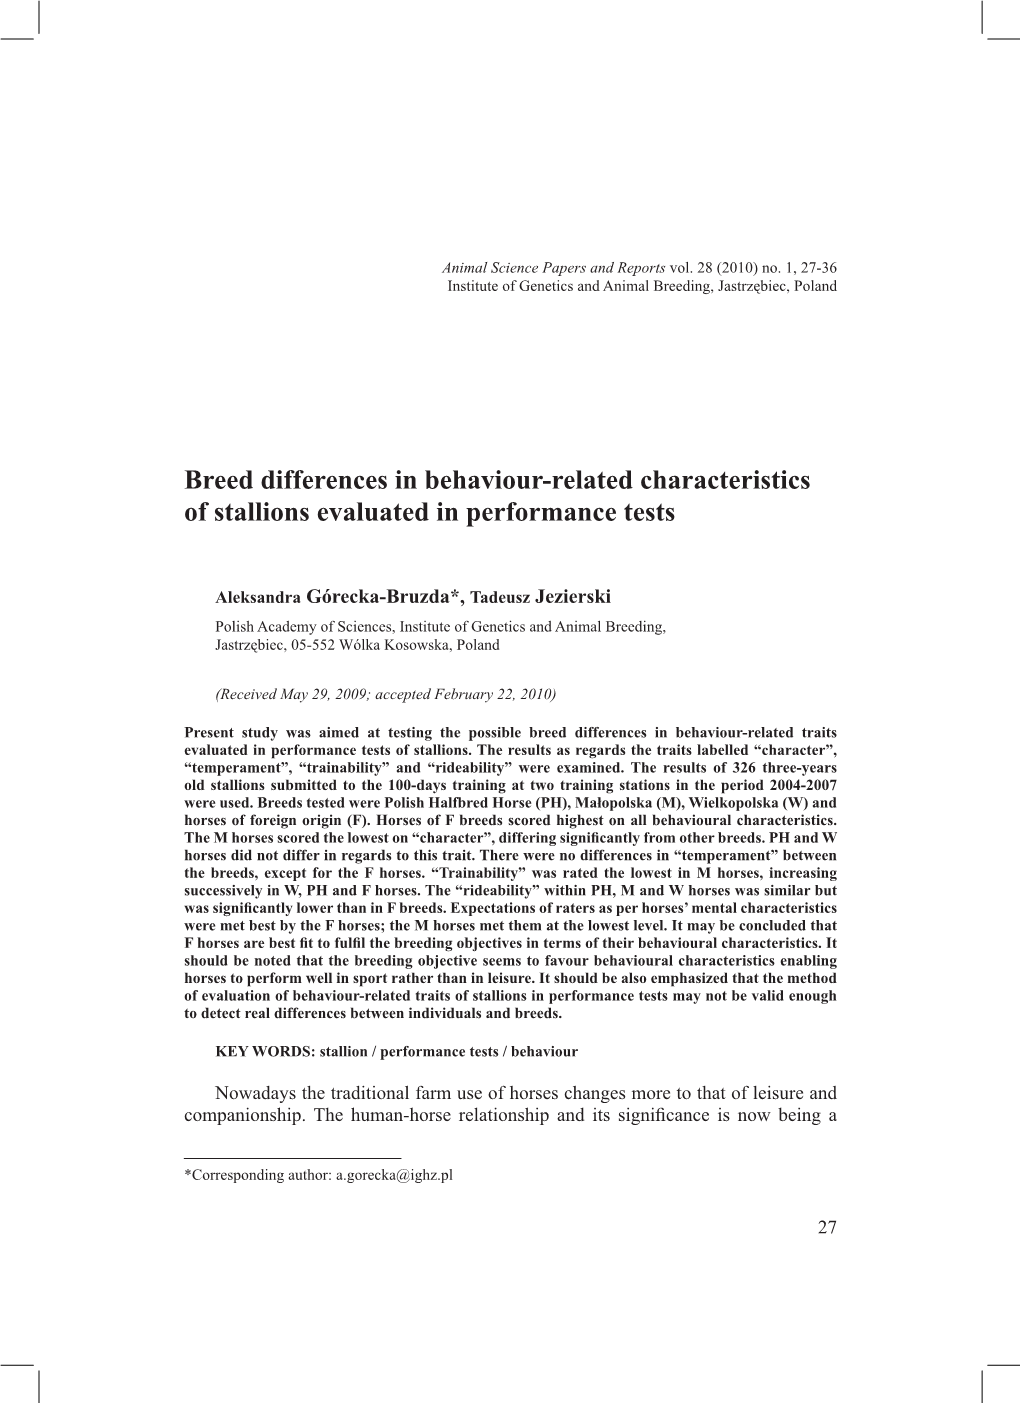 Breed Differences in Behaviour-Related Characteristics of Stallions Evaluated in Performance Tests